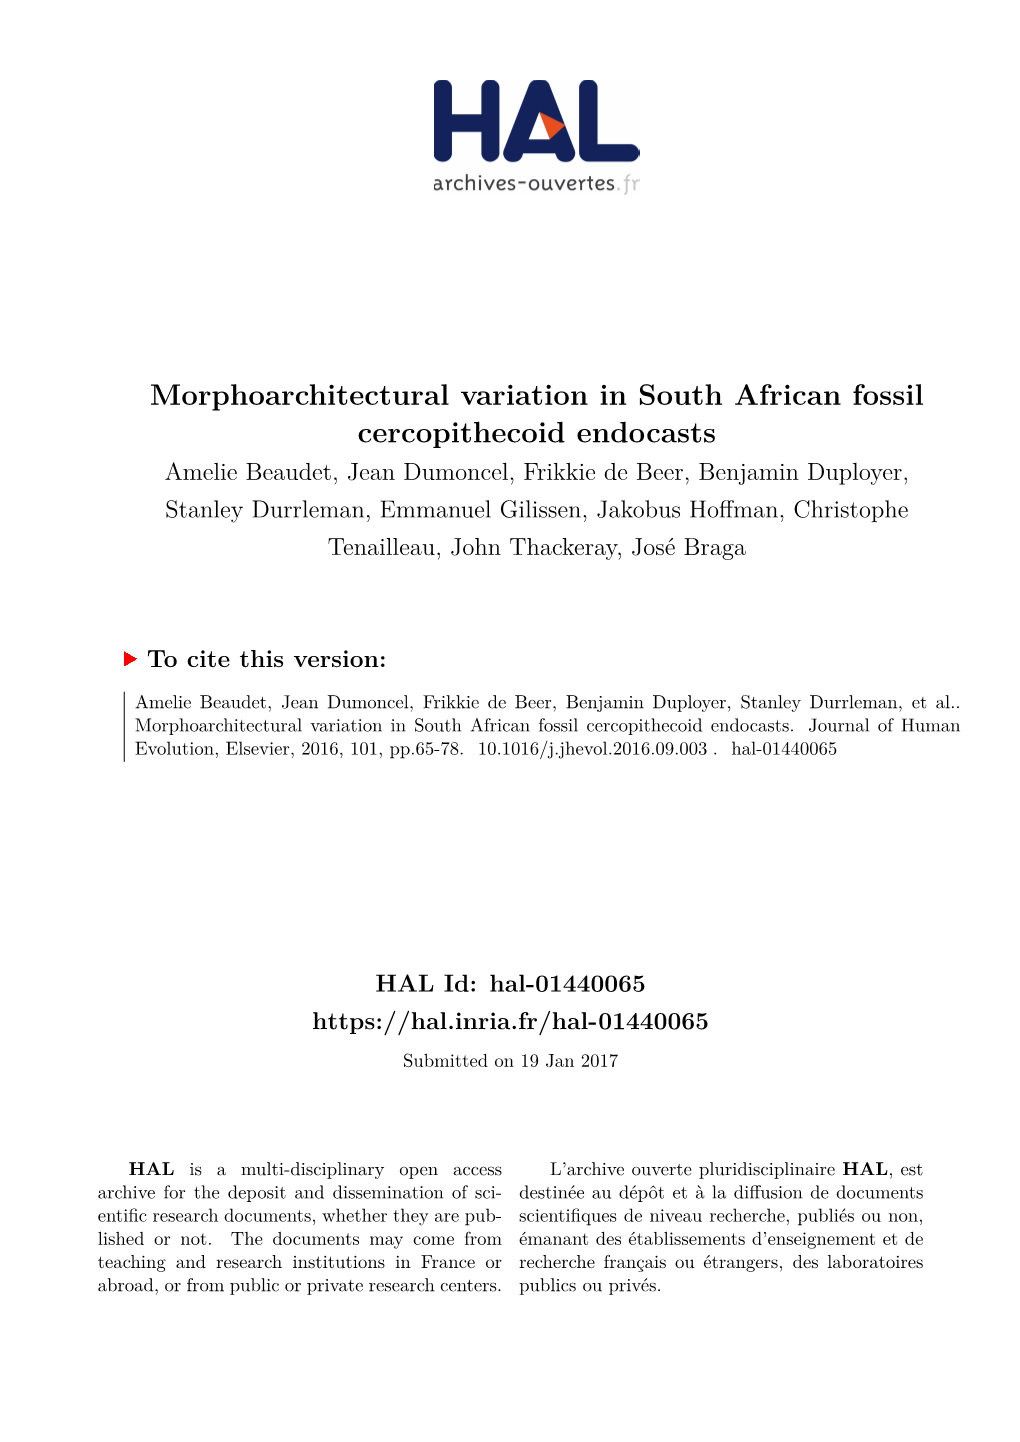 Morphoarchitectural Variation in South African Fossil Cercopithecoid